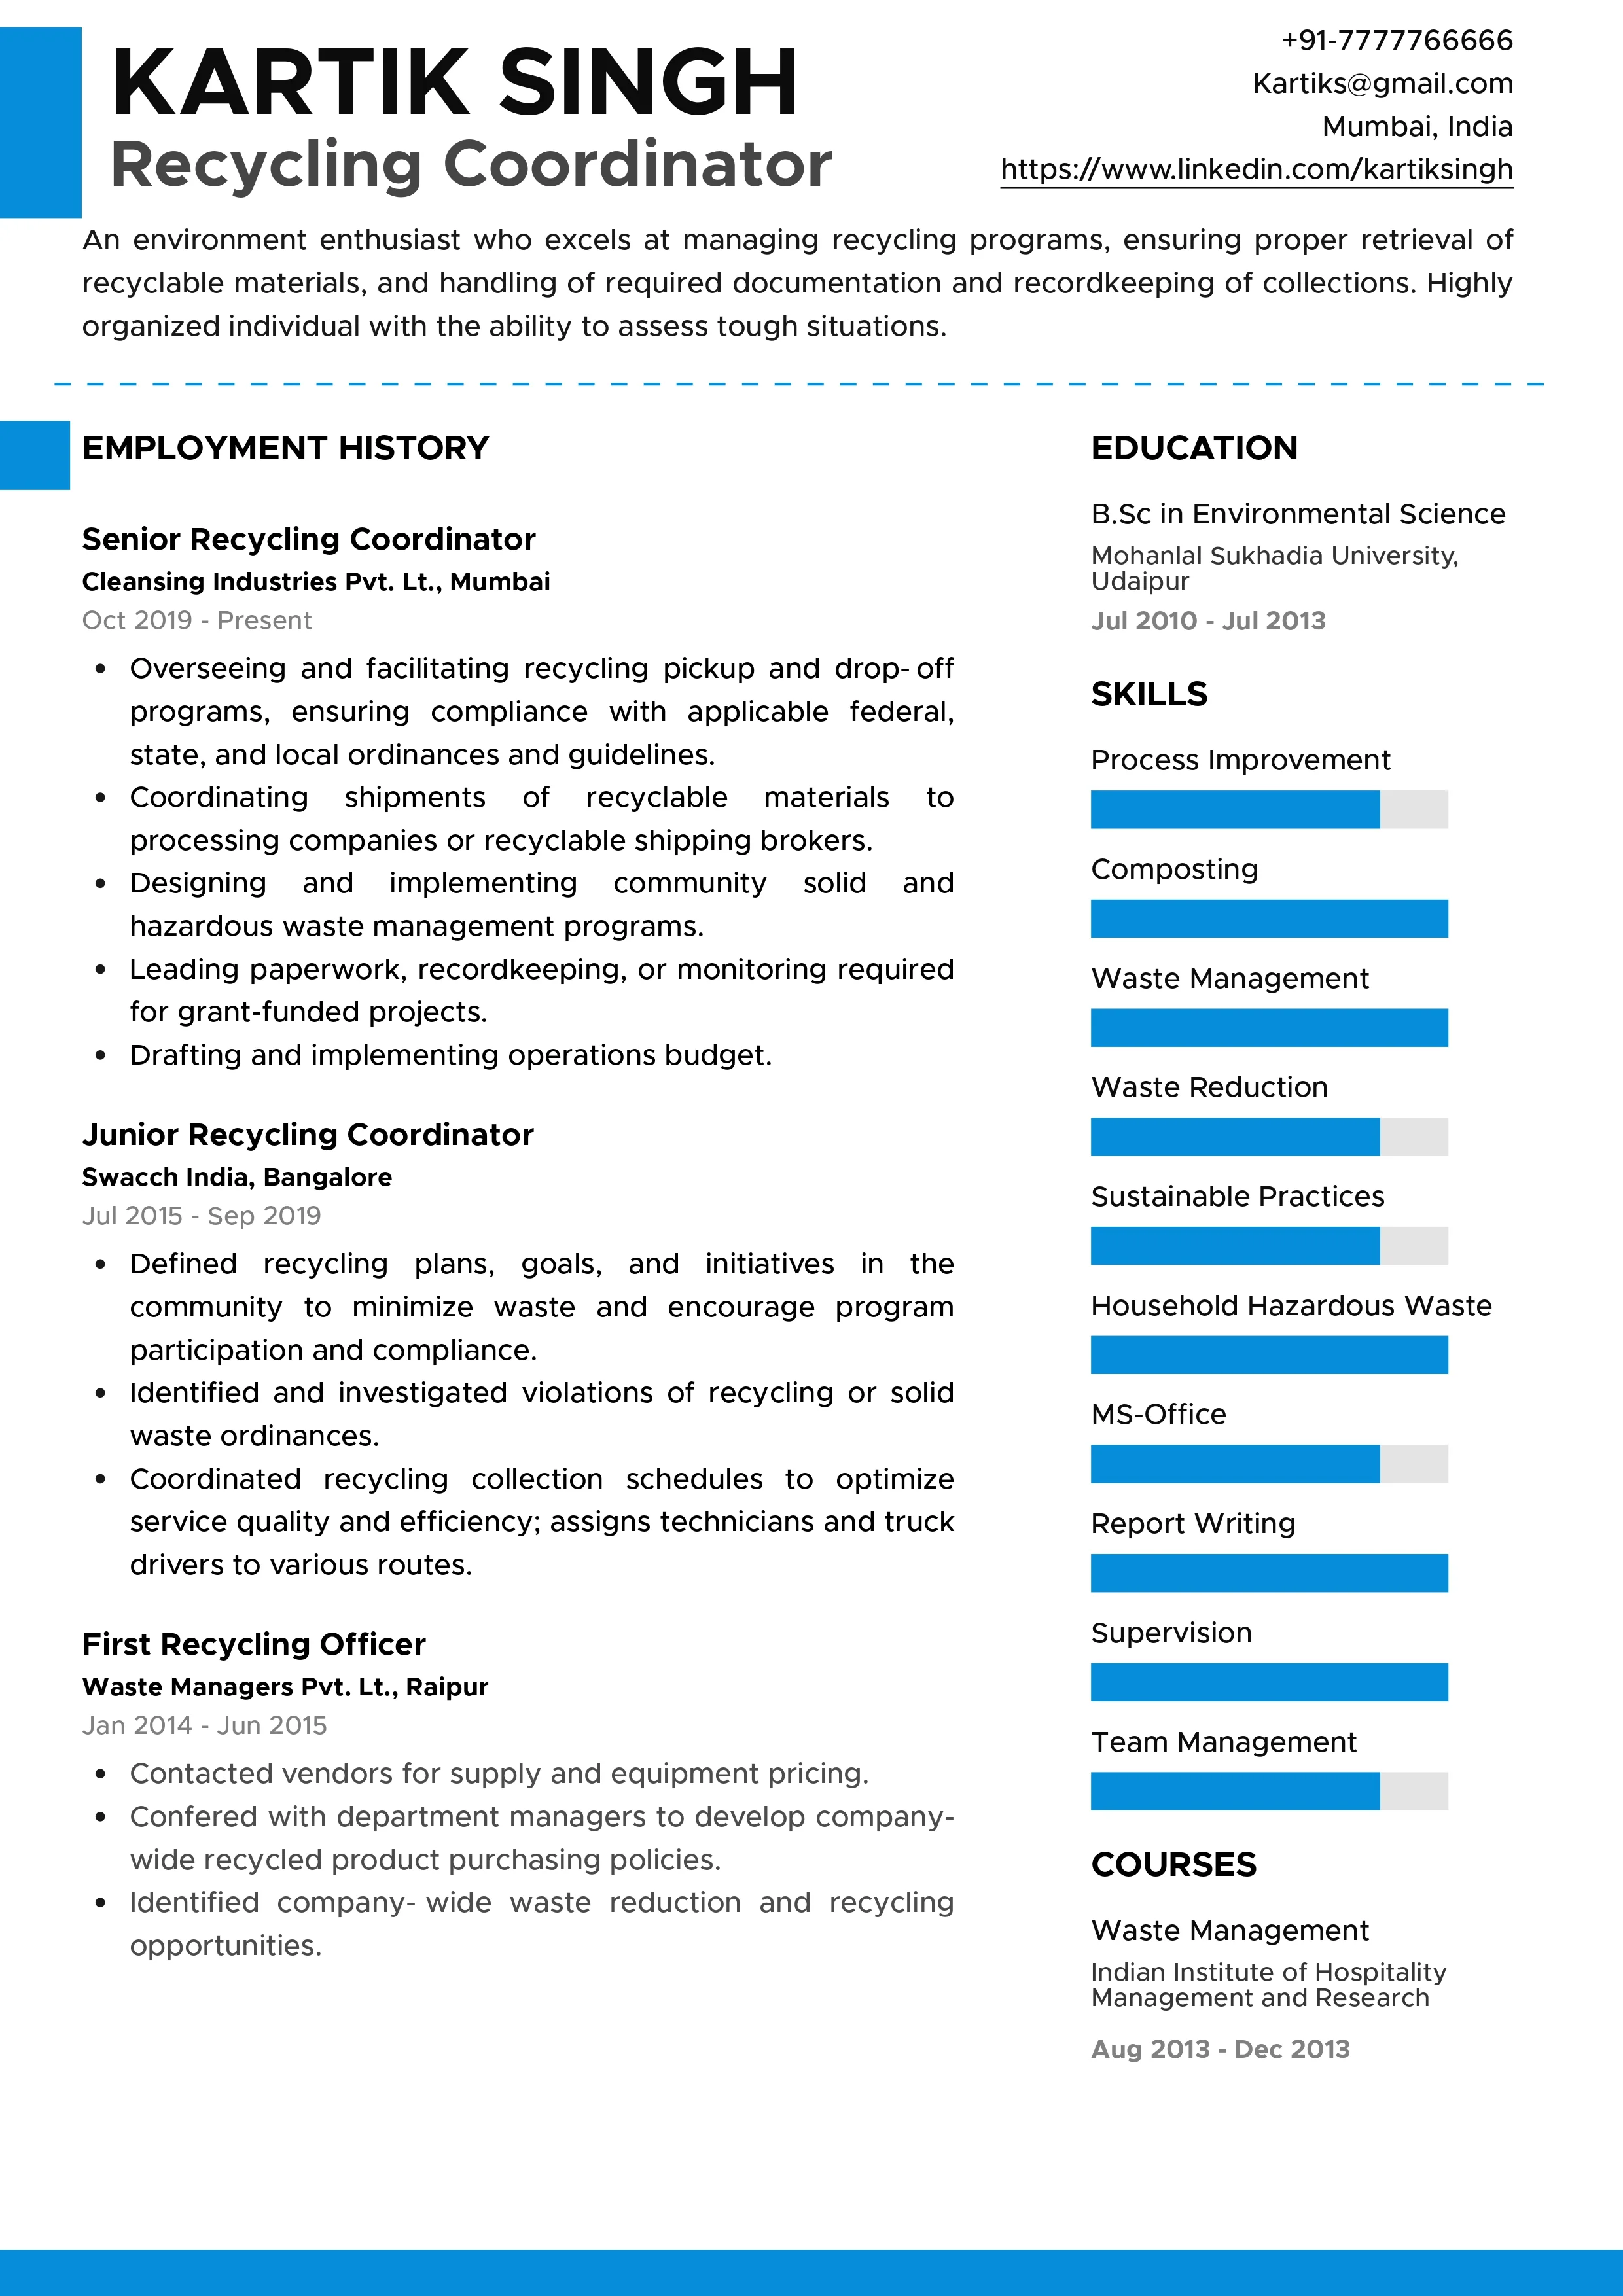 Sample Resume of Recycling Coordinator | Free Resume Templates & Samples on Resumod.co